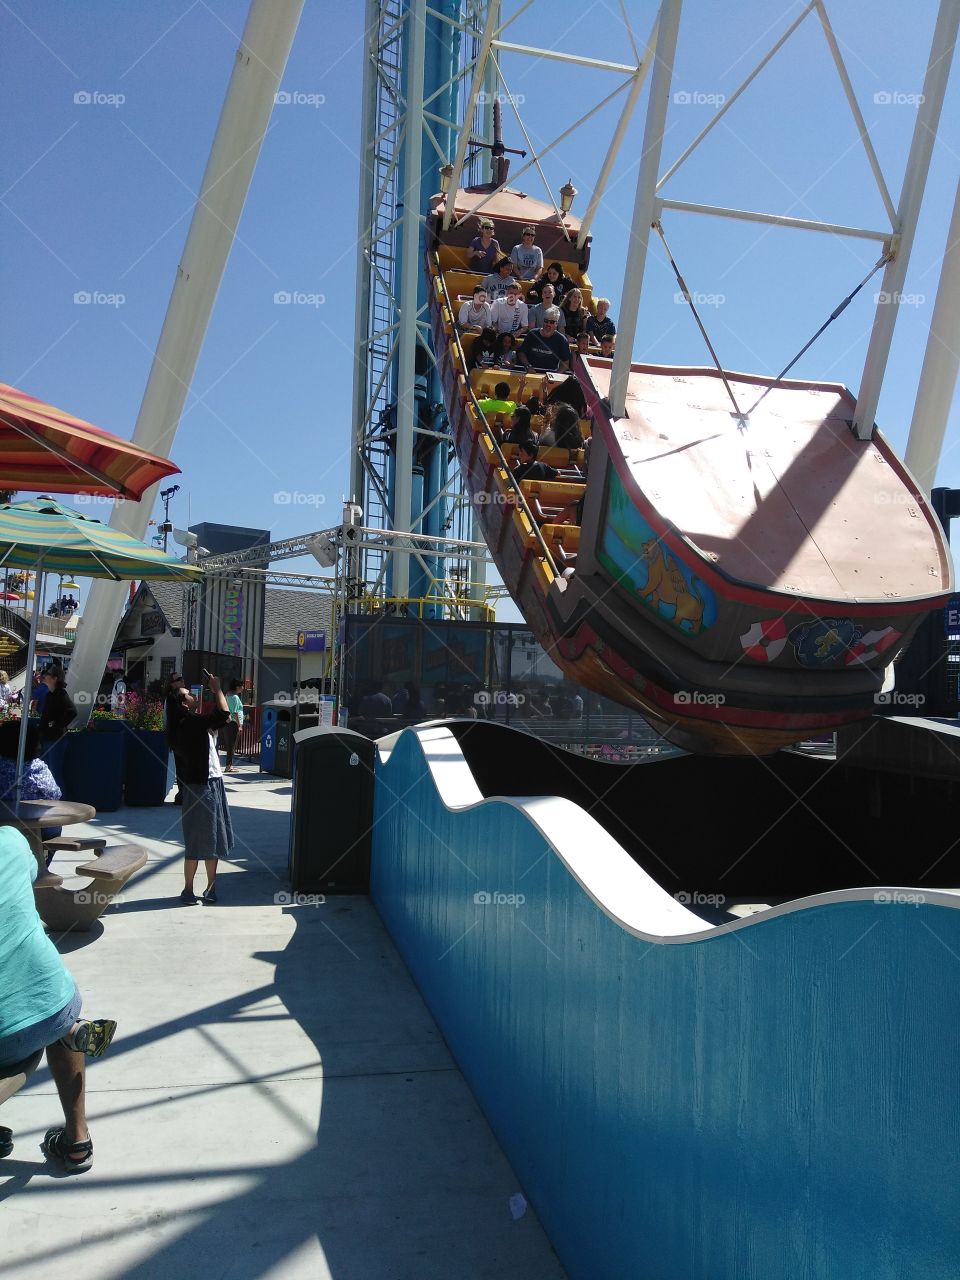 Pirate ship at the boardwalk